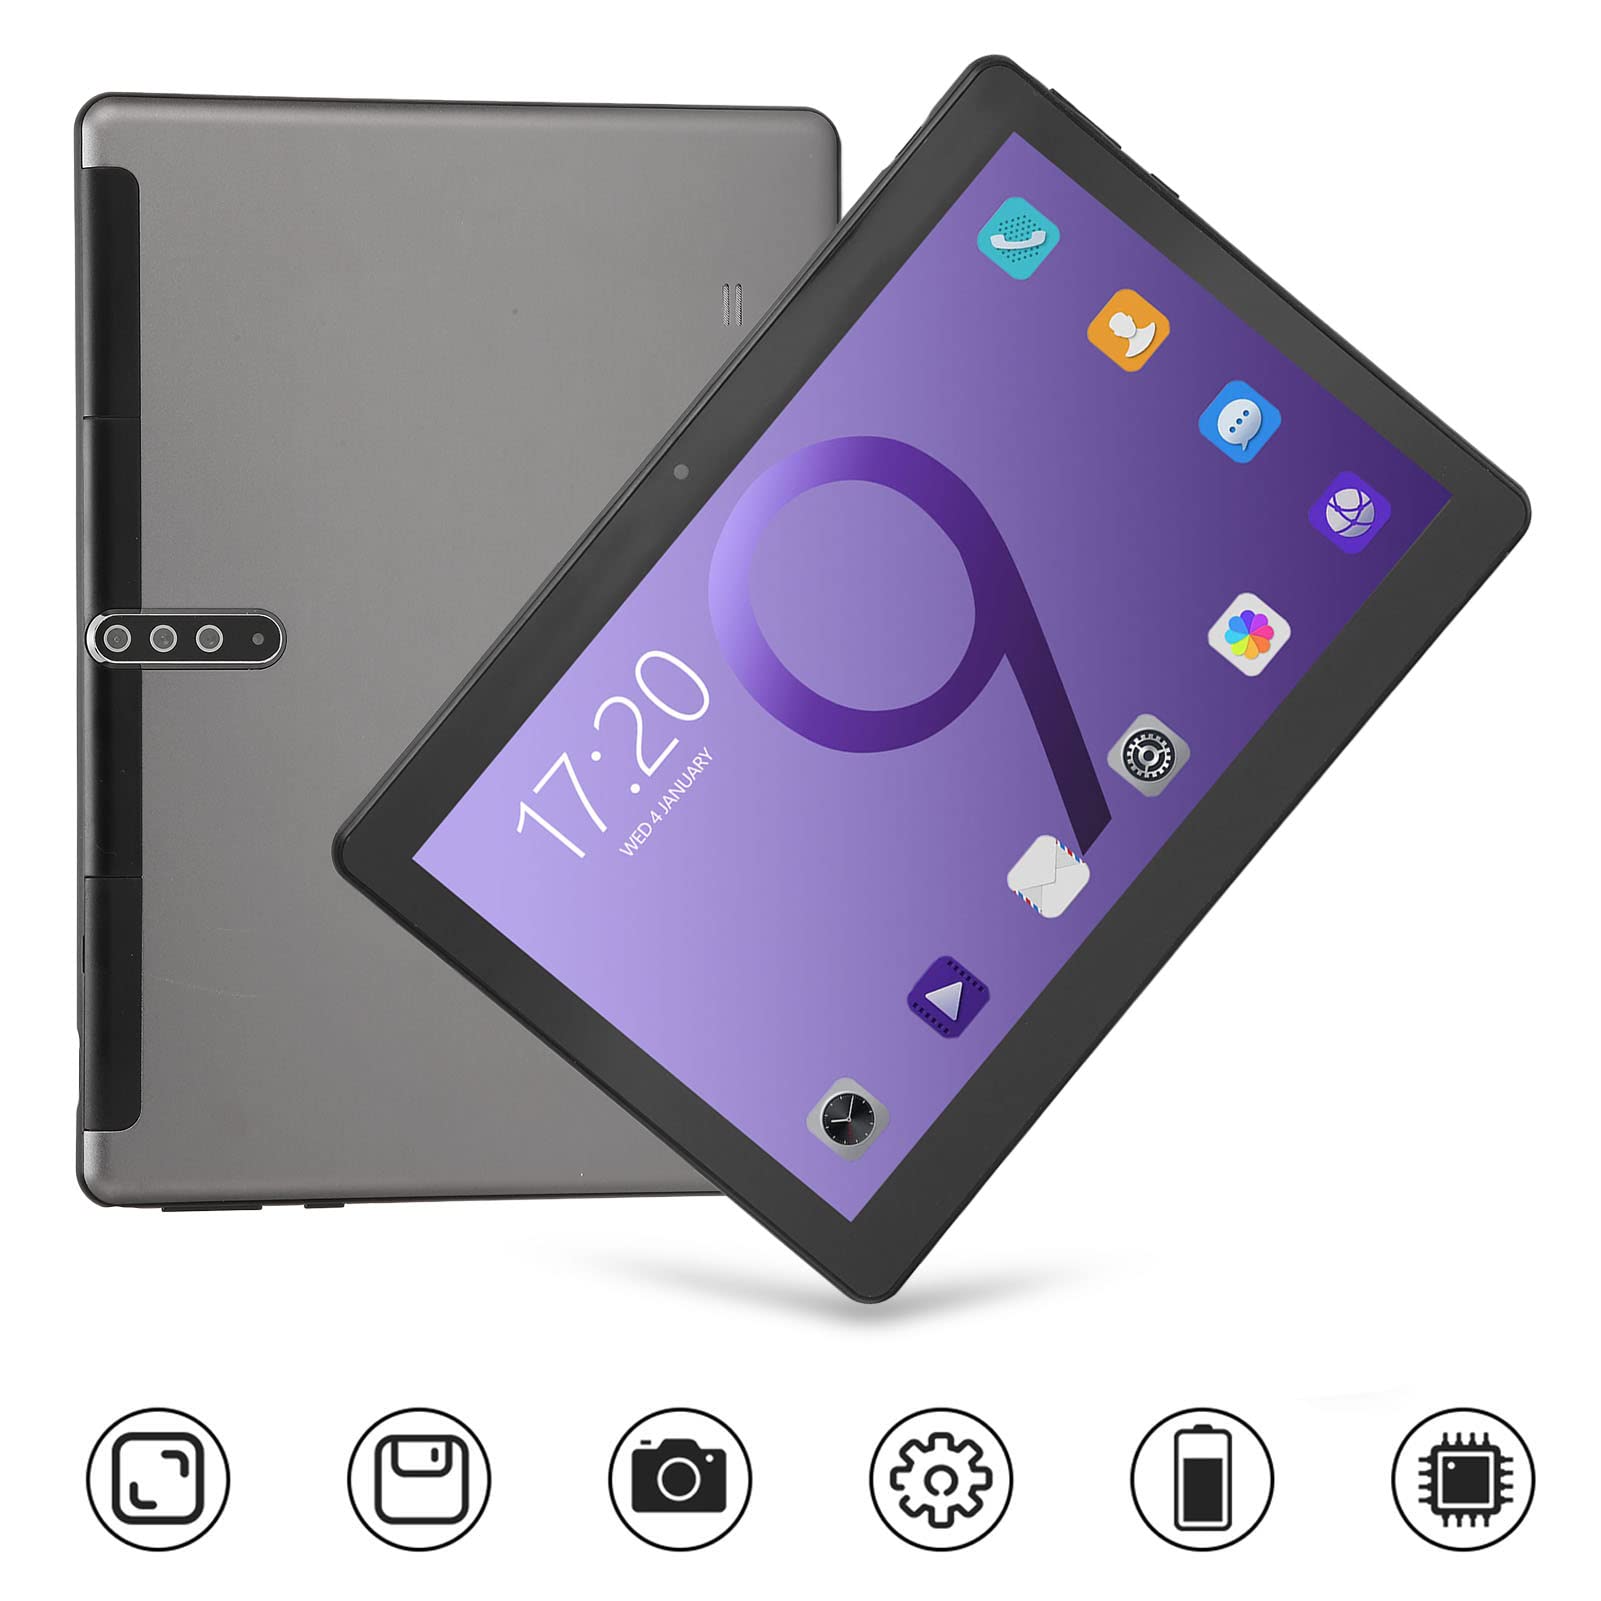 10.1 Inch IPS Display Tablet, 64GB Internal Storage, 10 Core CPU Processor 4GB RAM and 64GB Internal Storage, 2.4G/5G WiFi and 5.0BT Connection Suitable for Children to Read, Browse(USA)